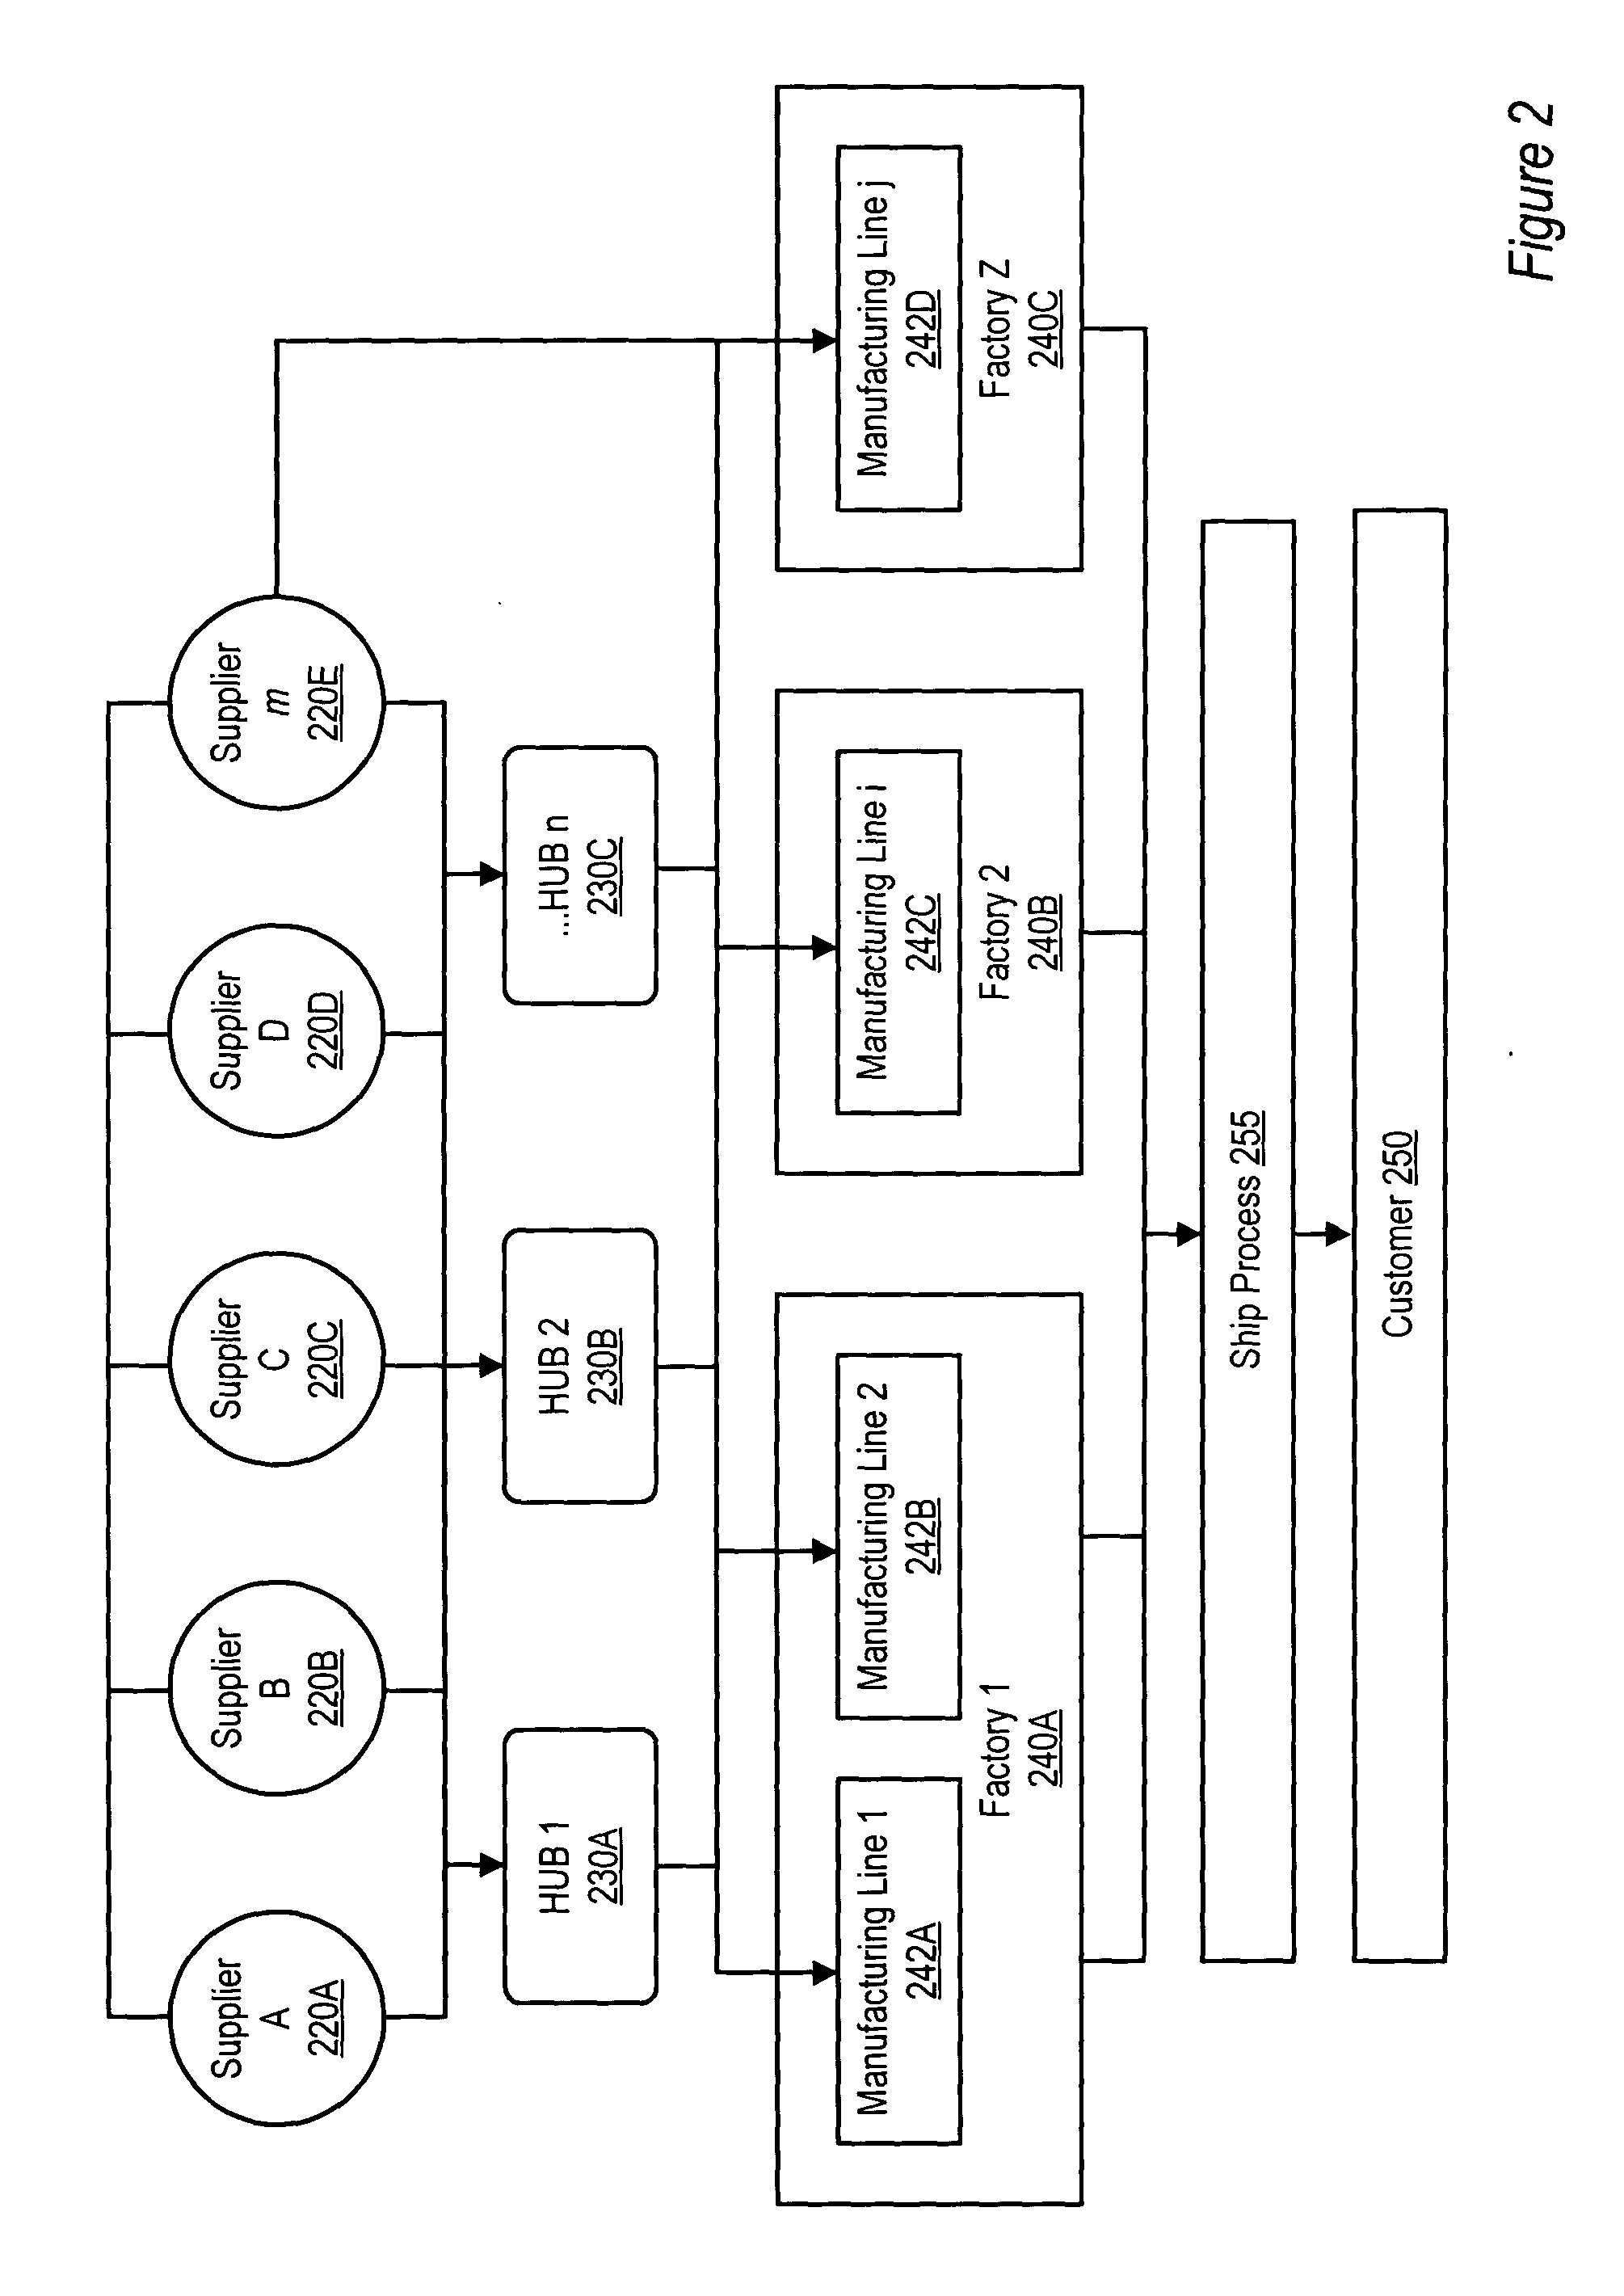 Synchronized production with dynamic logistics routing